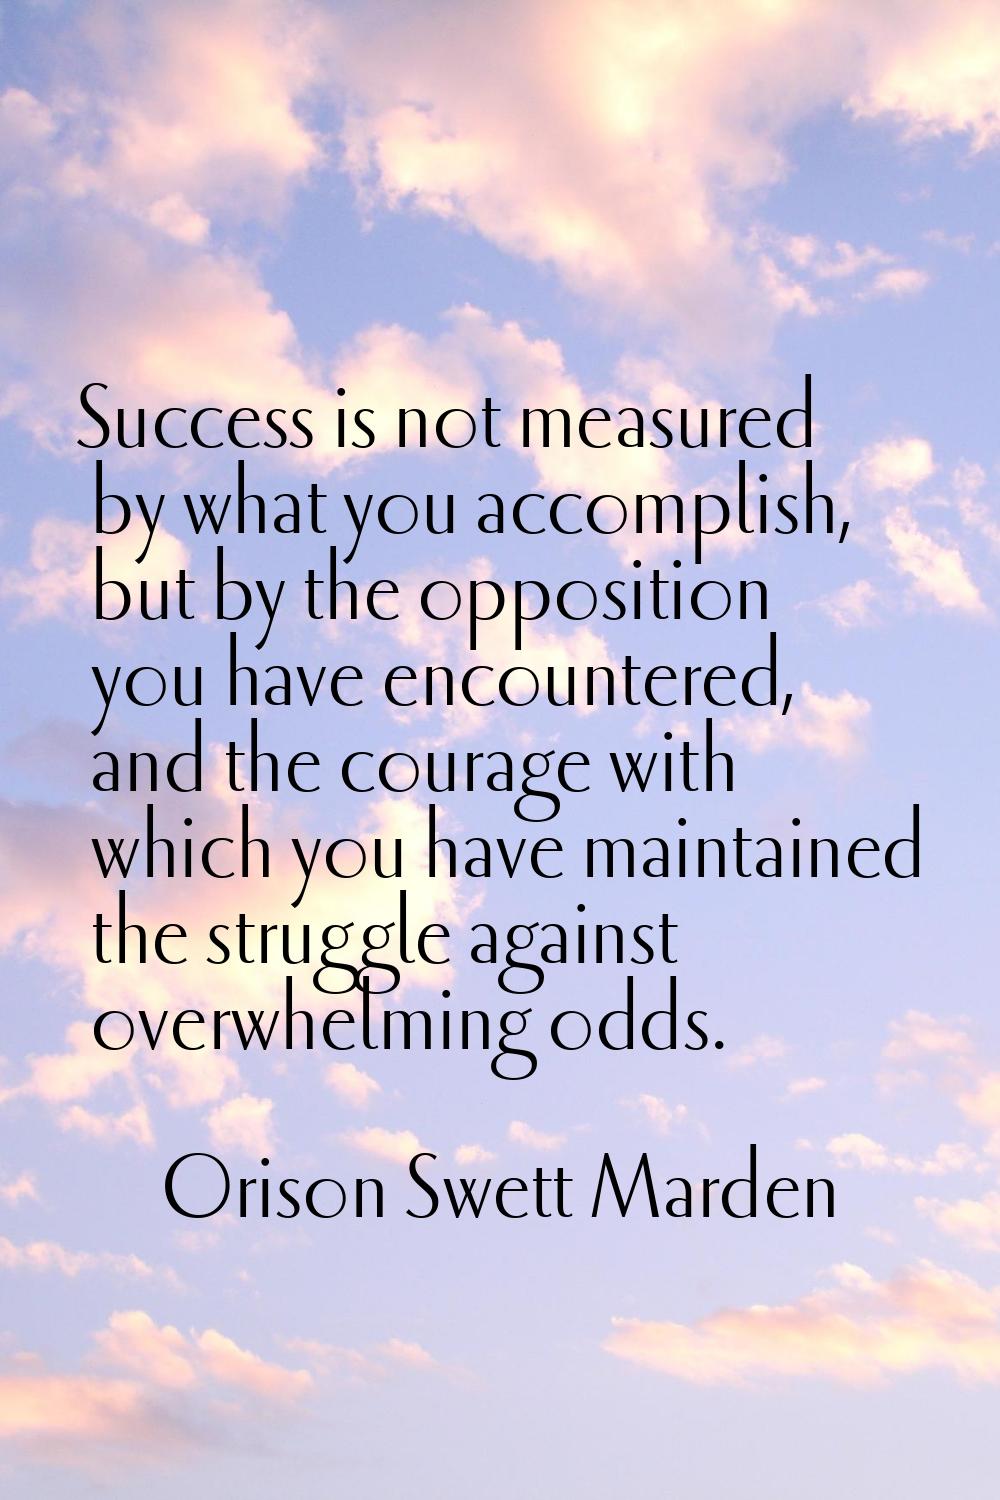 Success is not measured by what you accomplish, but by the opposition you have encountered, and the